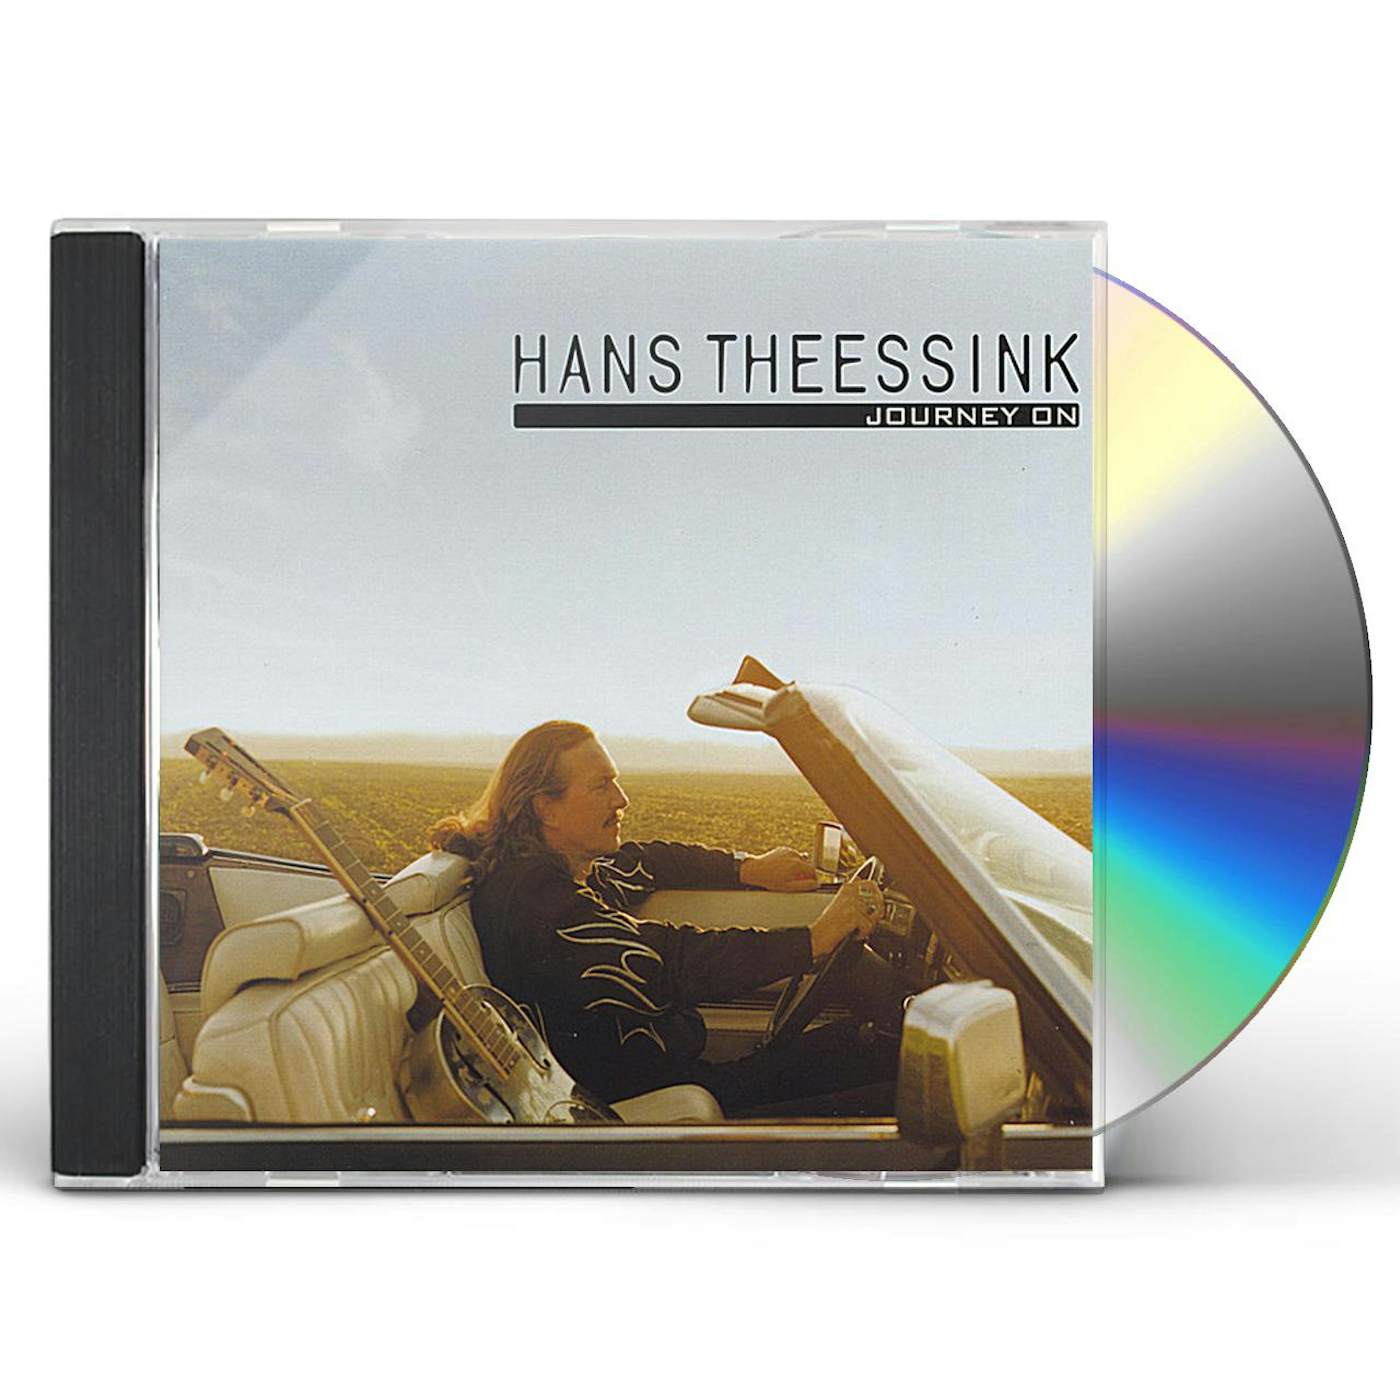 Hans Theessink JOURNEY ON CD